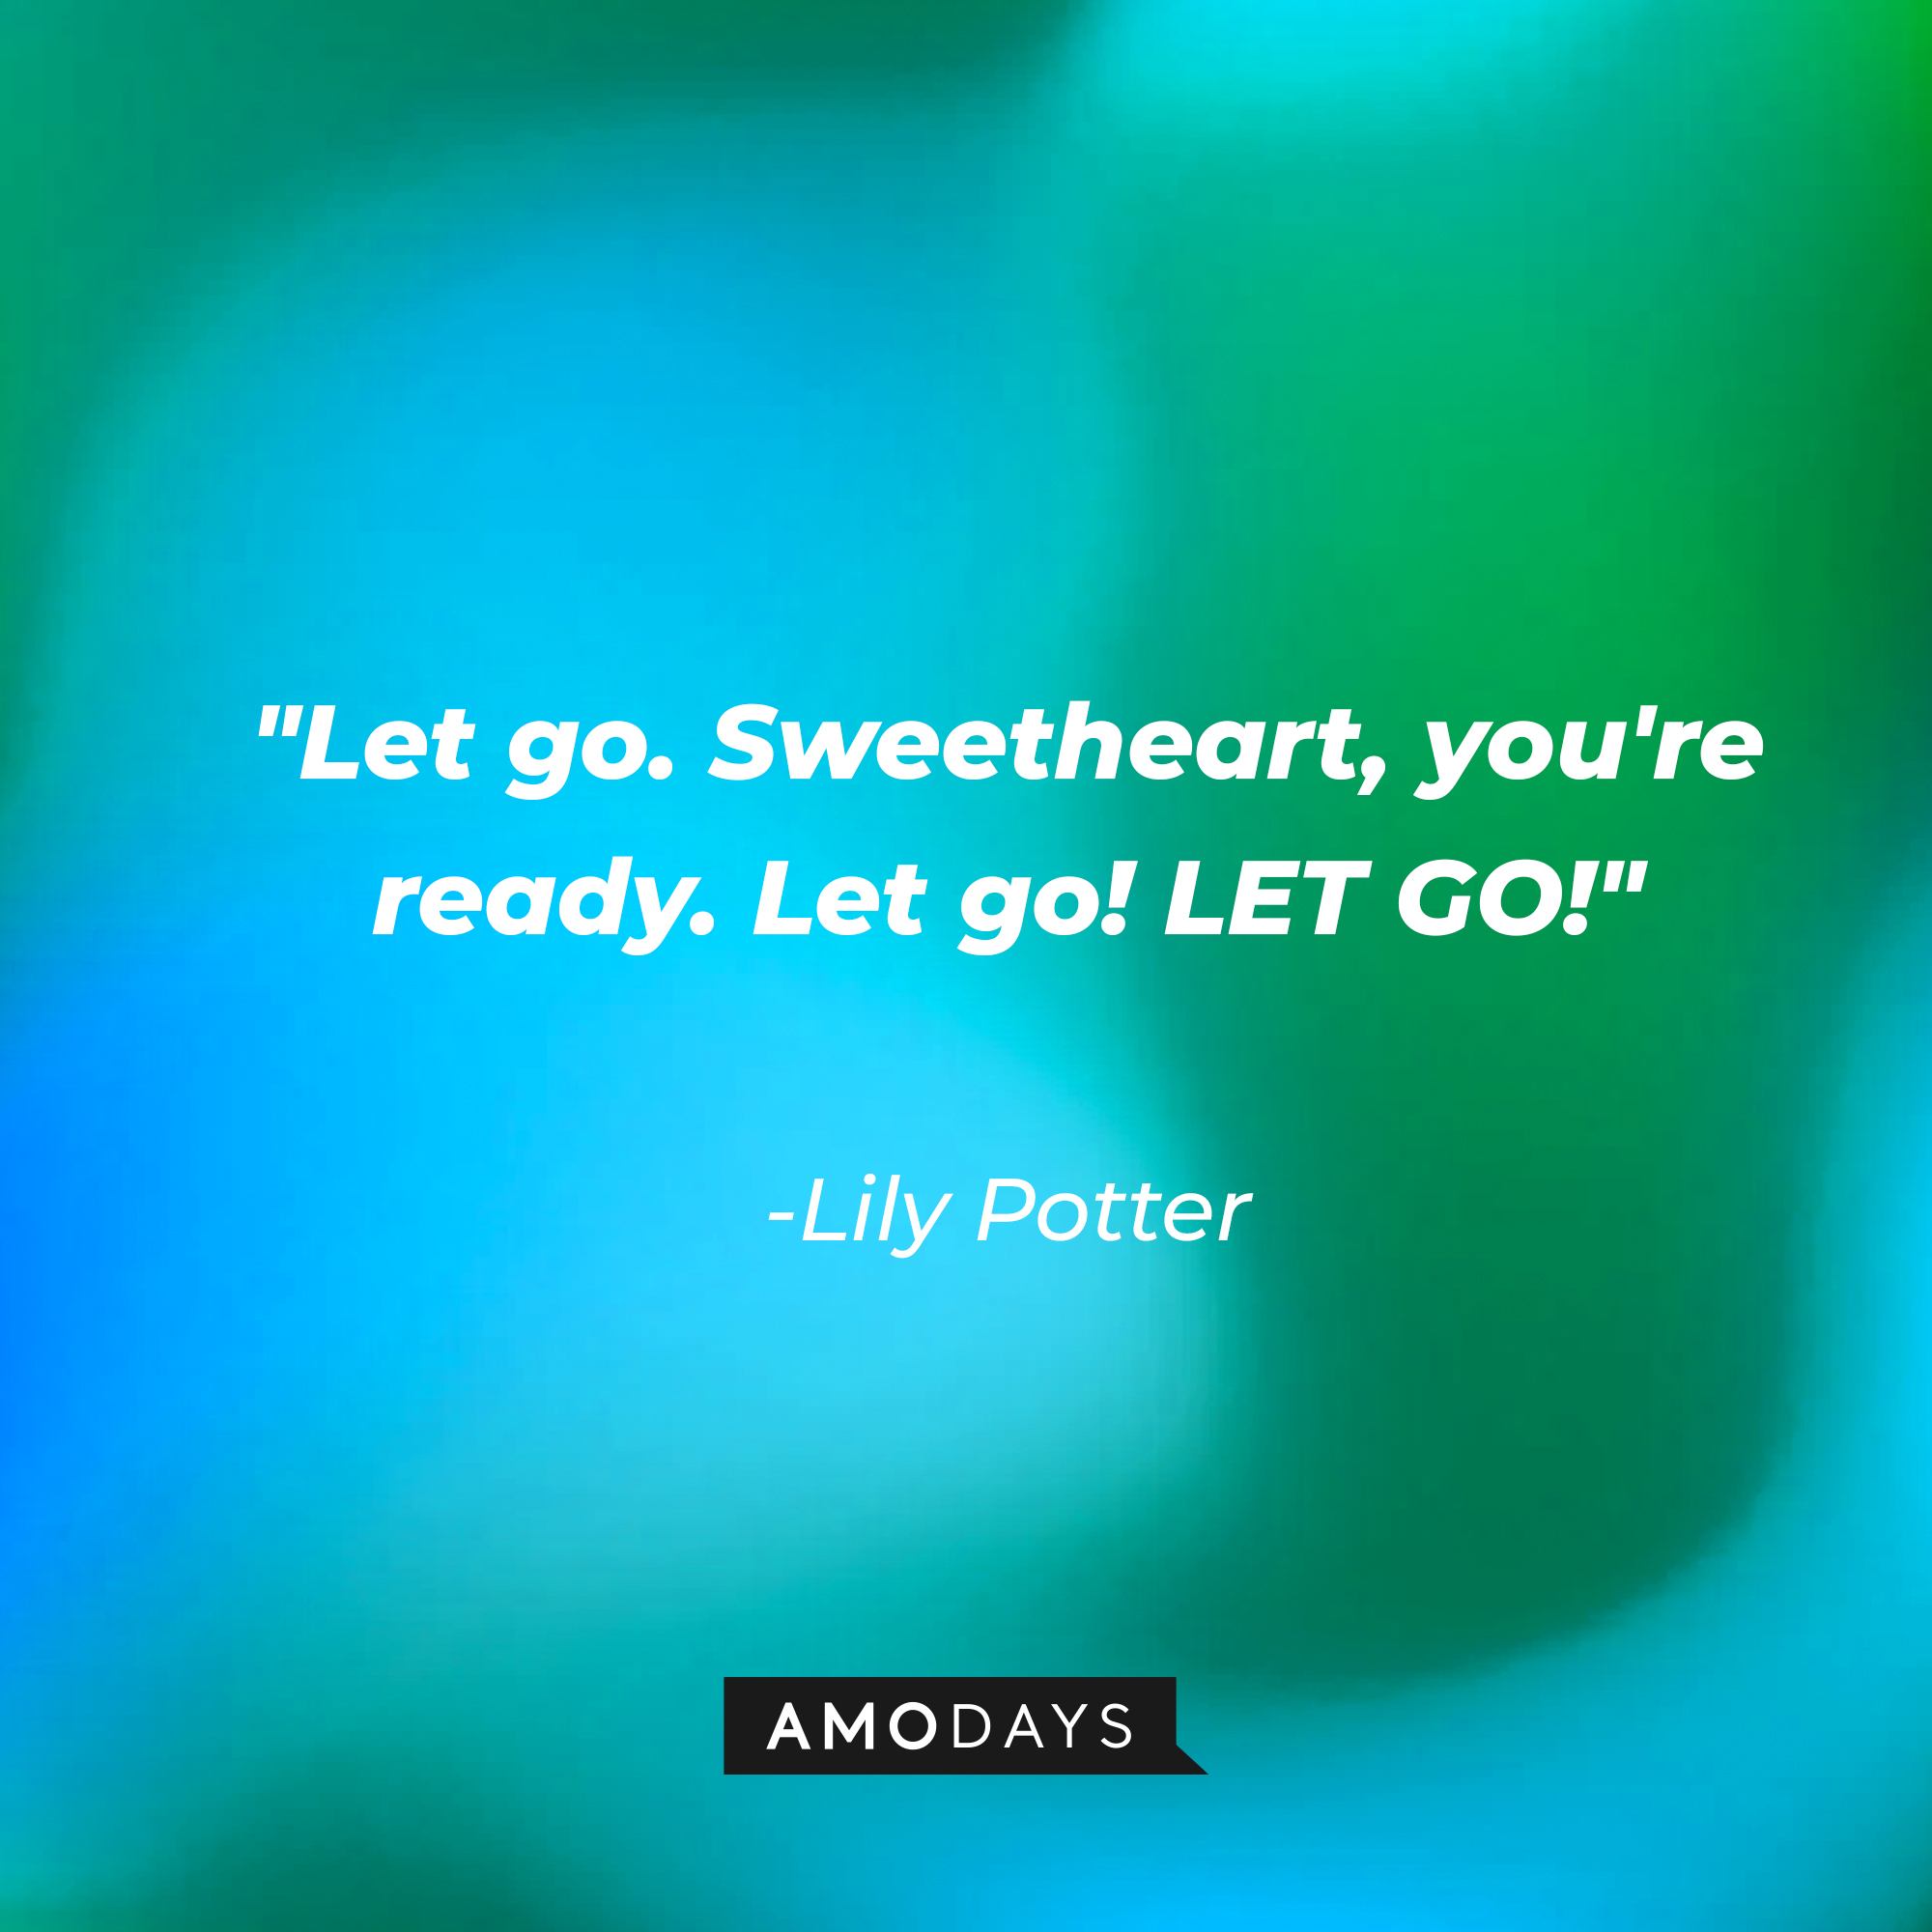 Lily Potter's quote: "Let go. Sweetheart, you're ready. Let go! LET GO!" | Image: Amodays